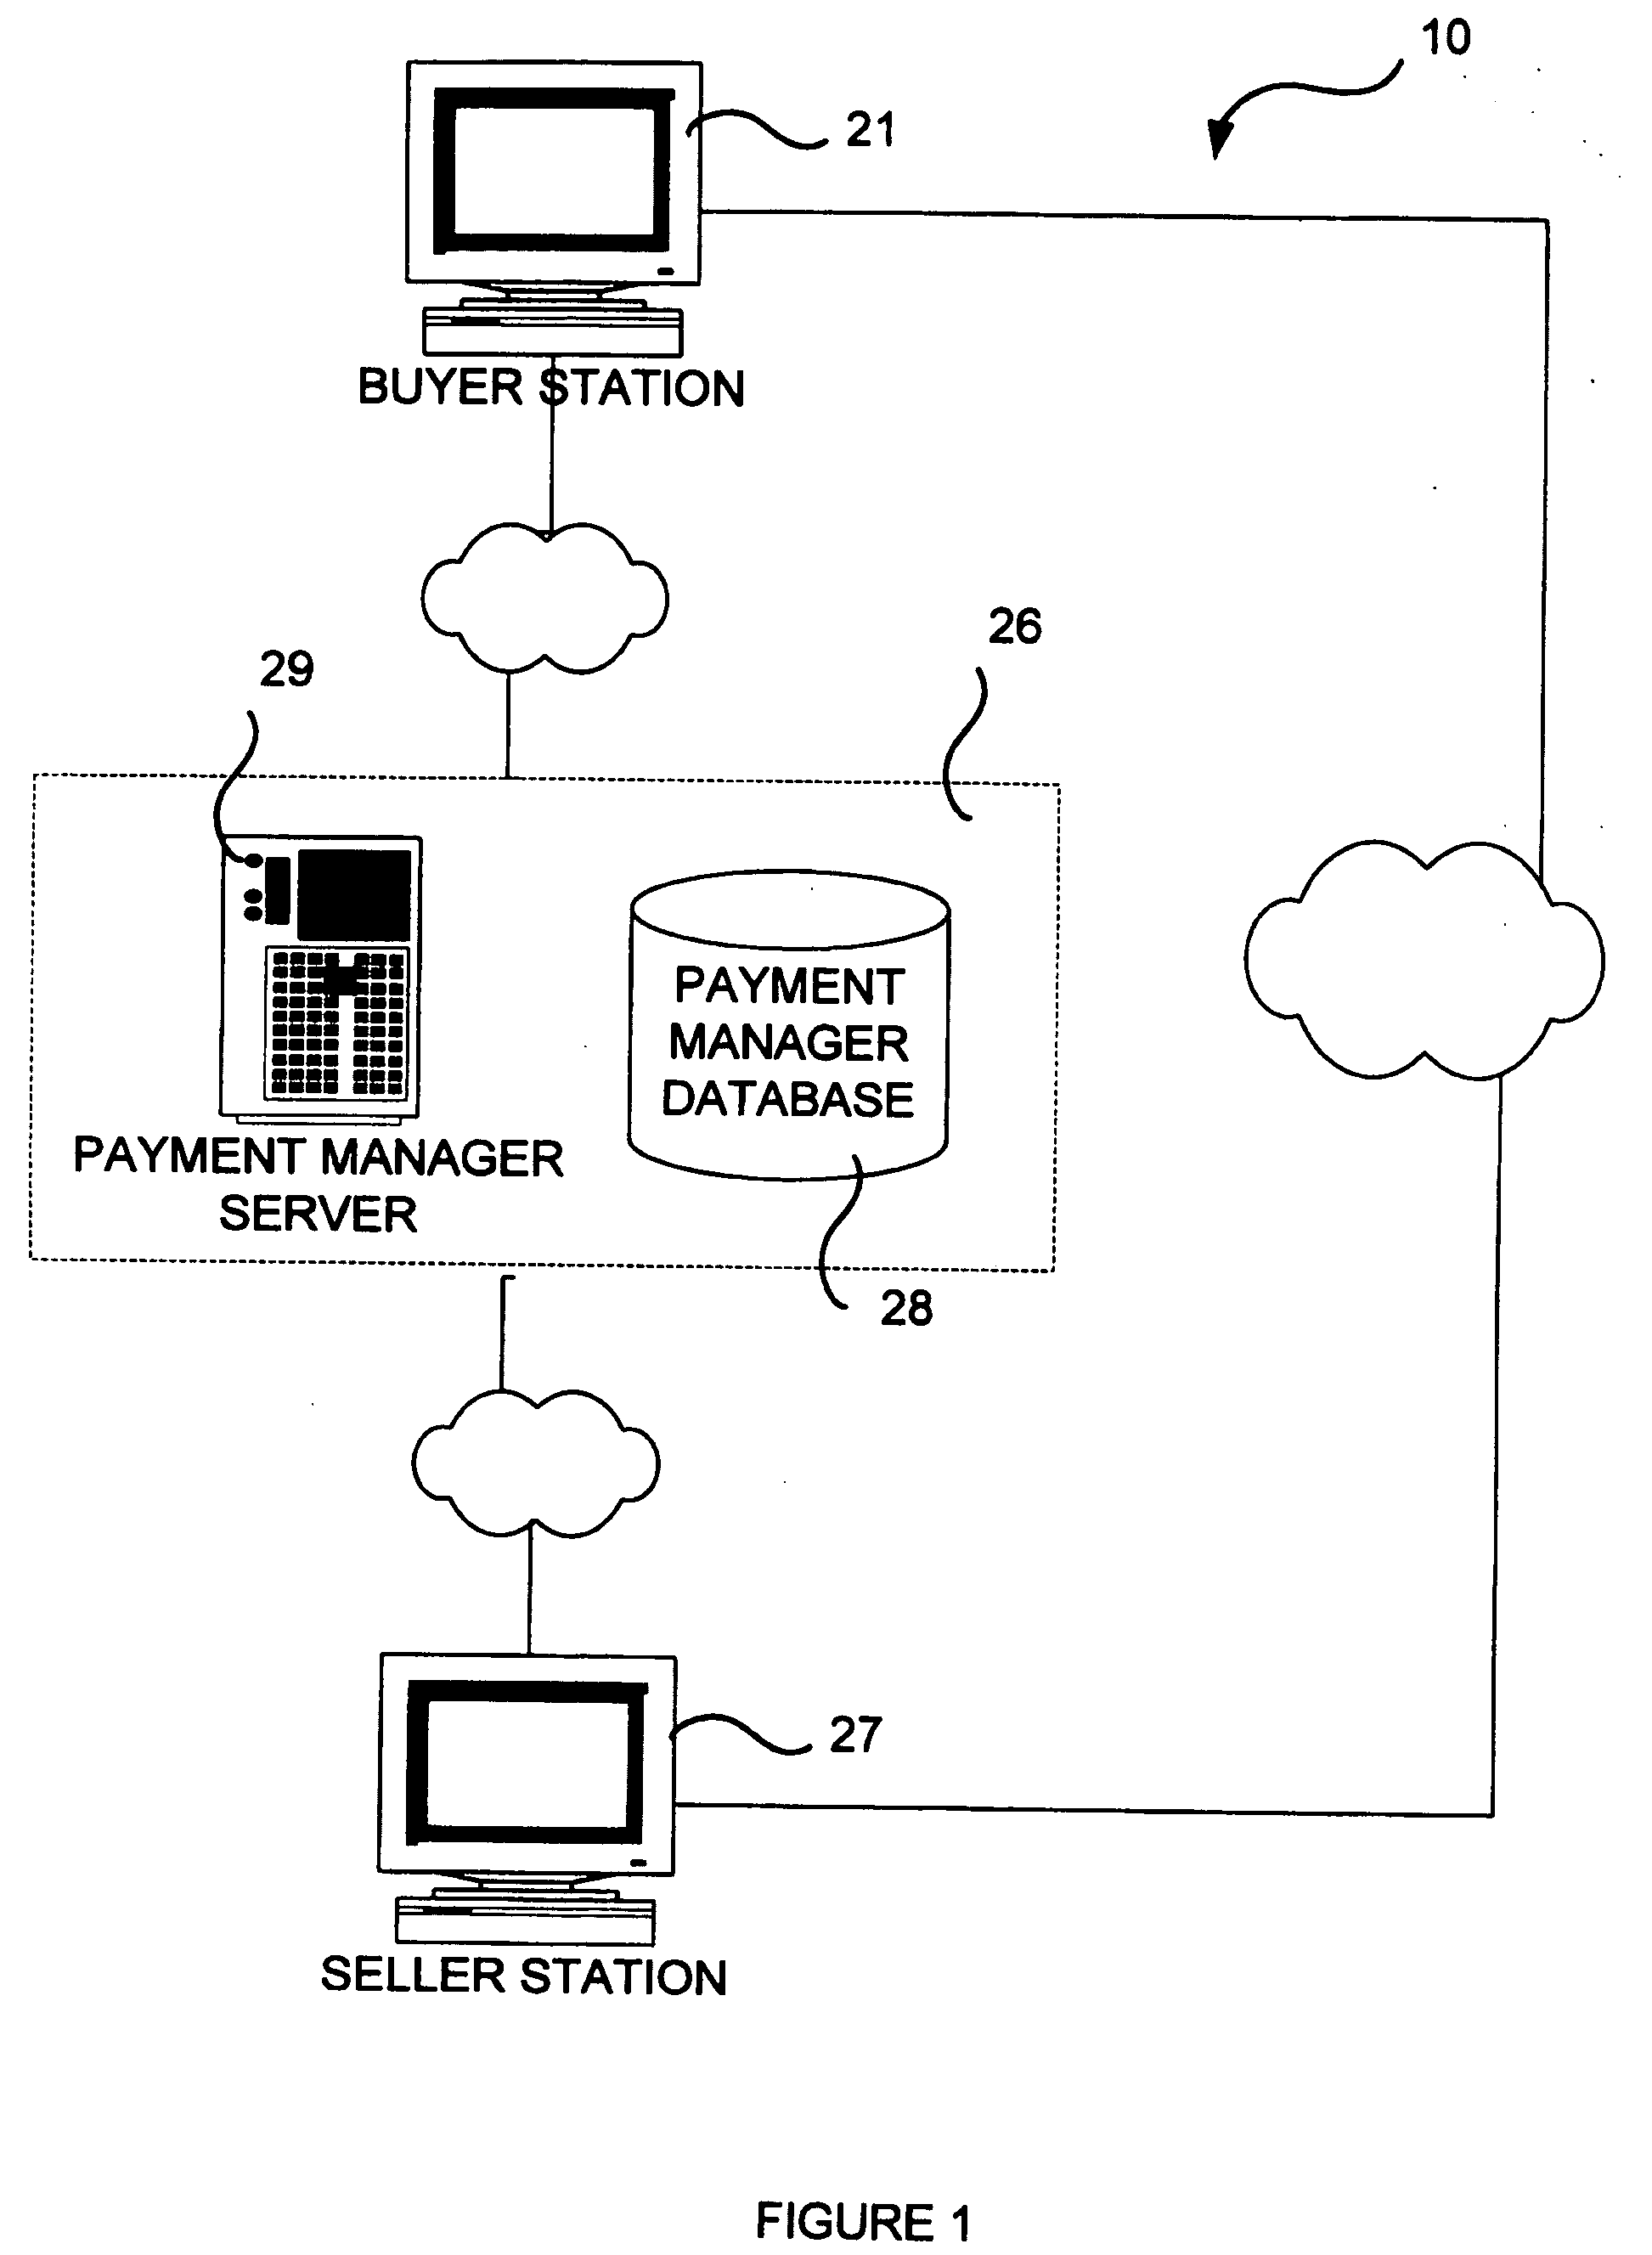 Method for securing a payment transaction over a public network